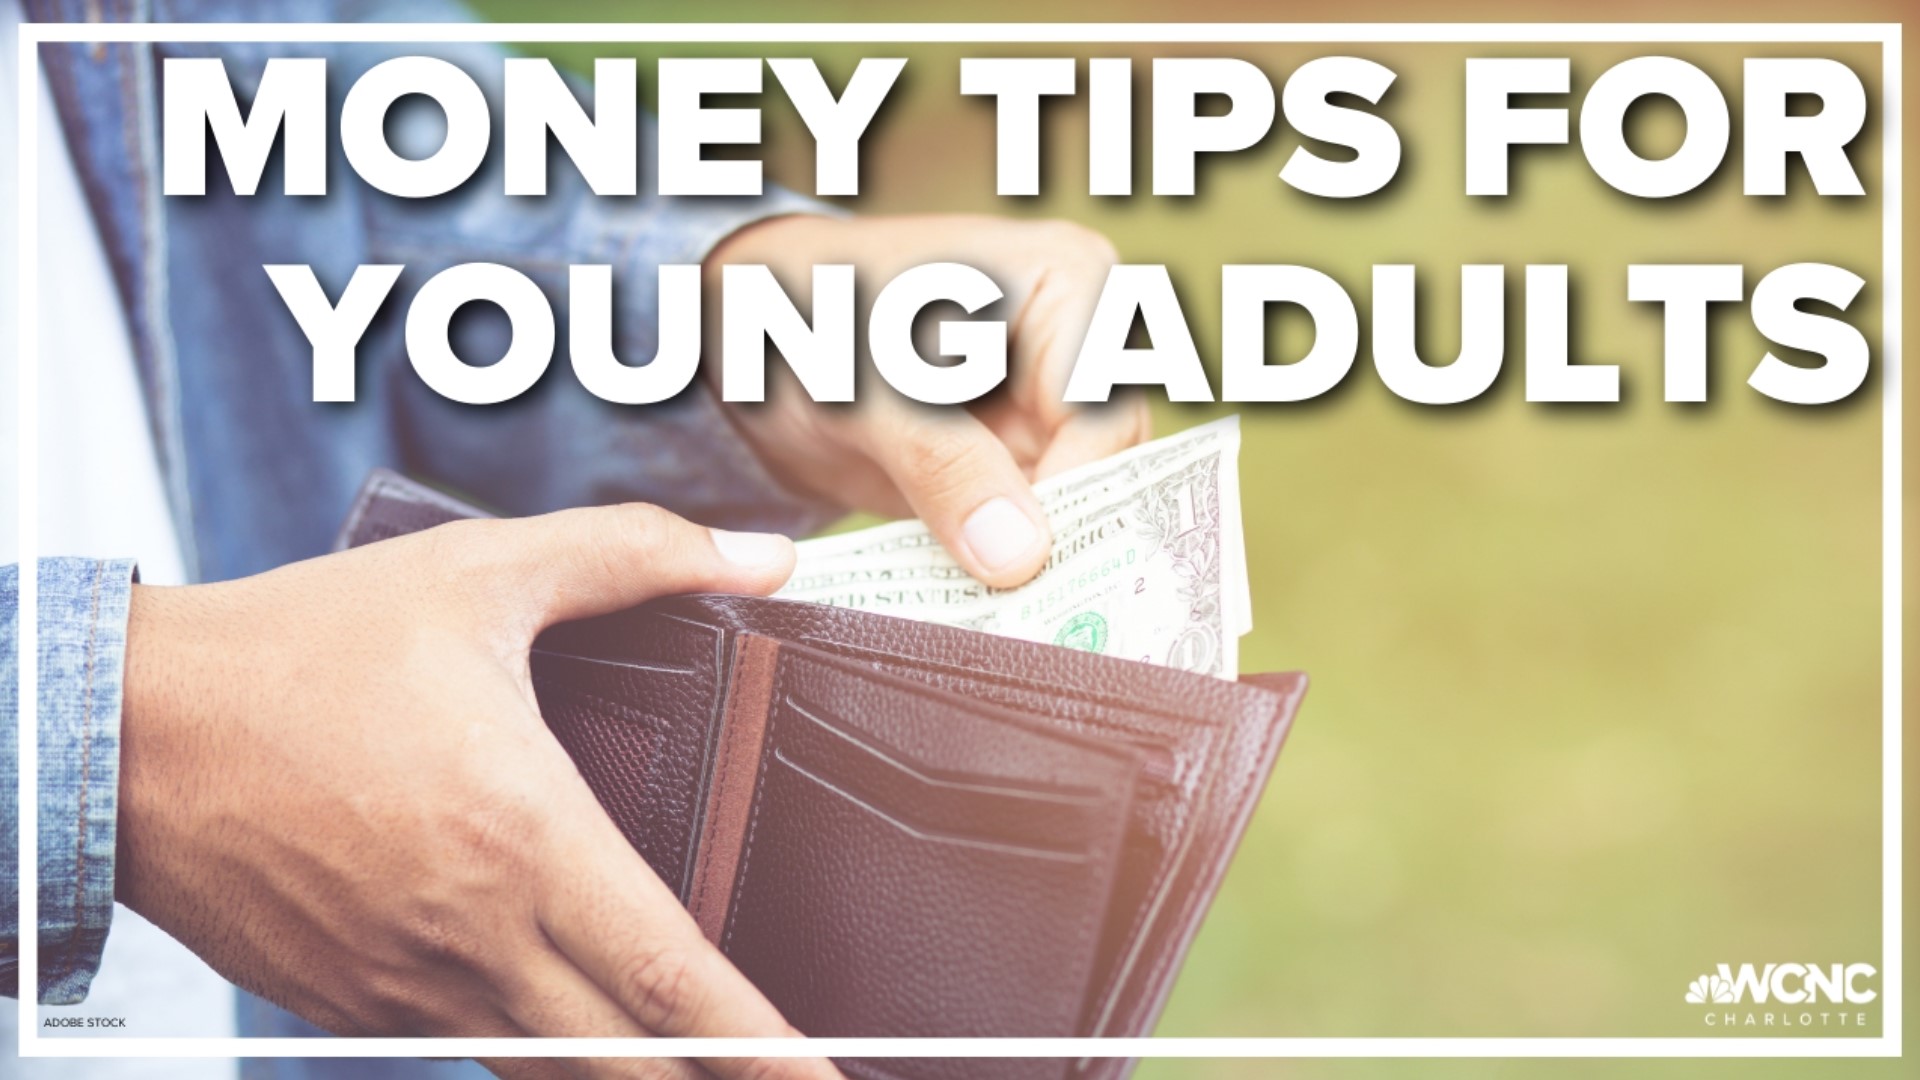 Your early twenties, when you're just about to graduate from college is an exciting time.  It's also a make or break time when it comes to developing money habits.